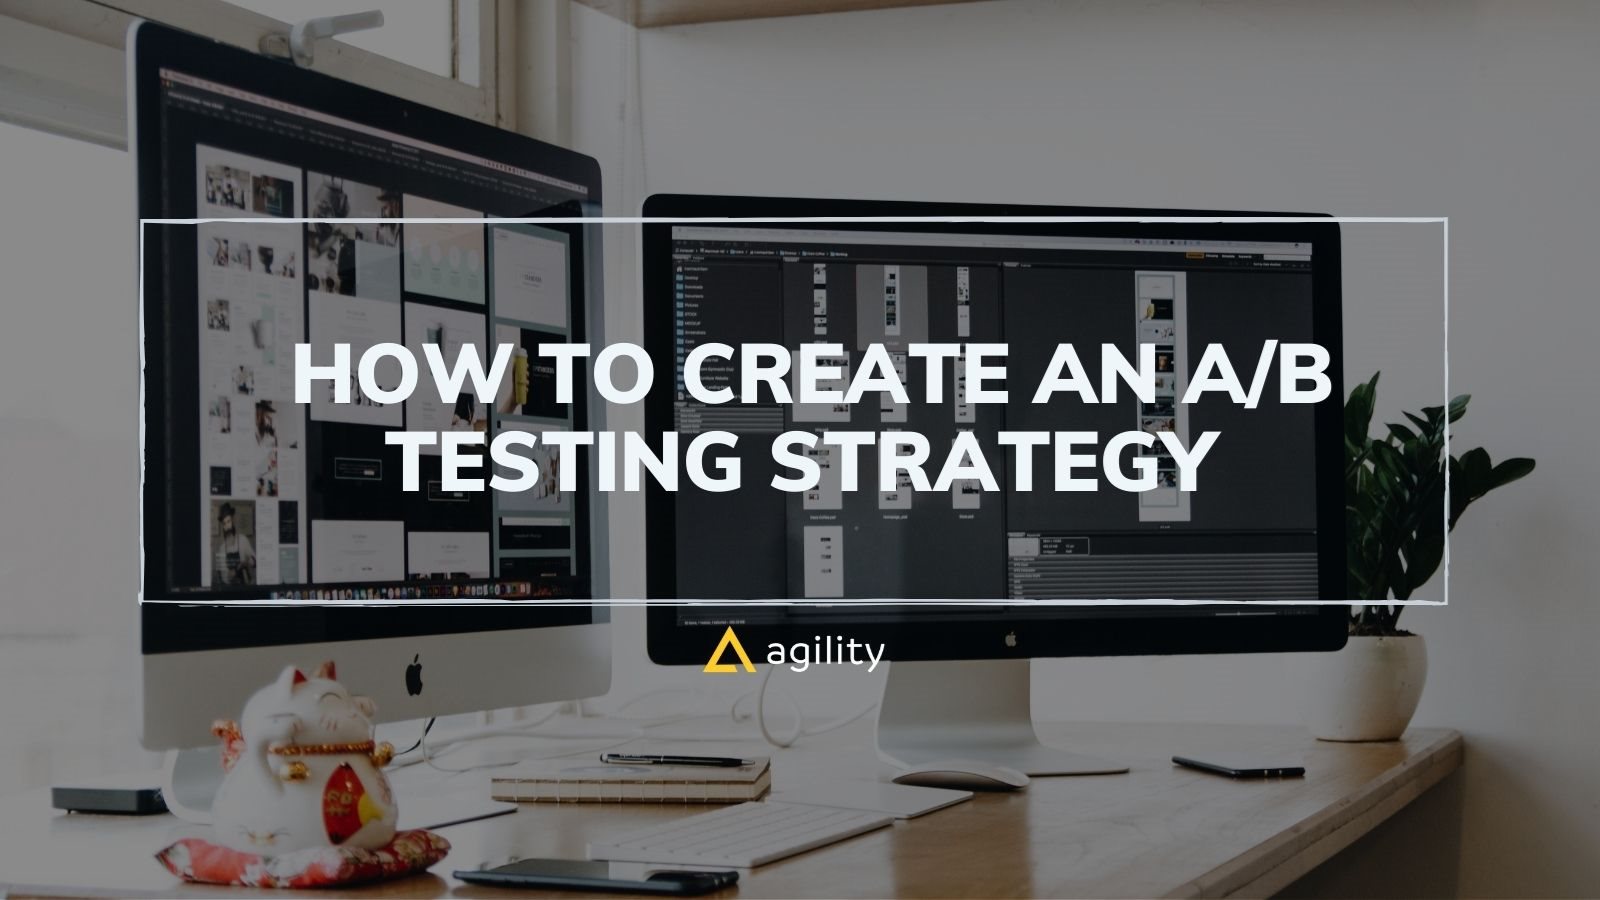  How to Create an A/B Testing Strategy